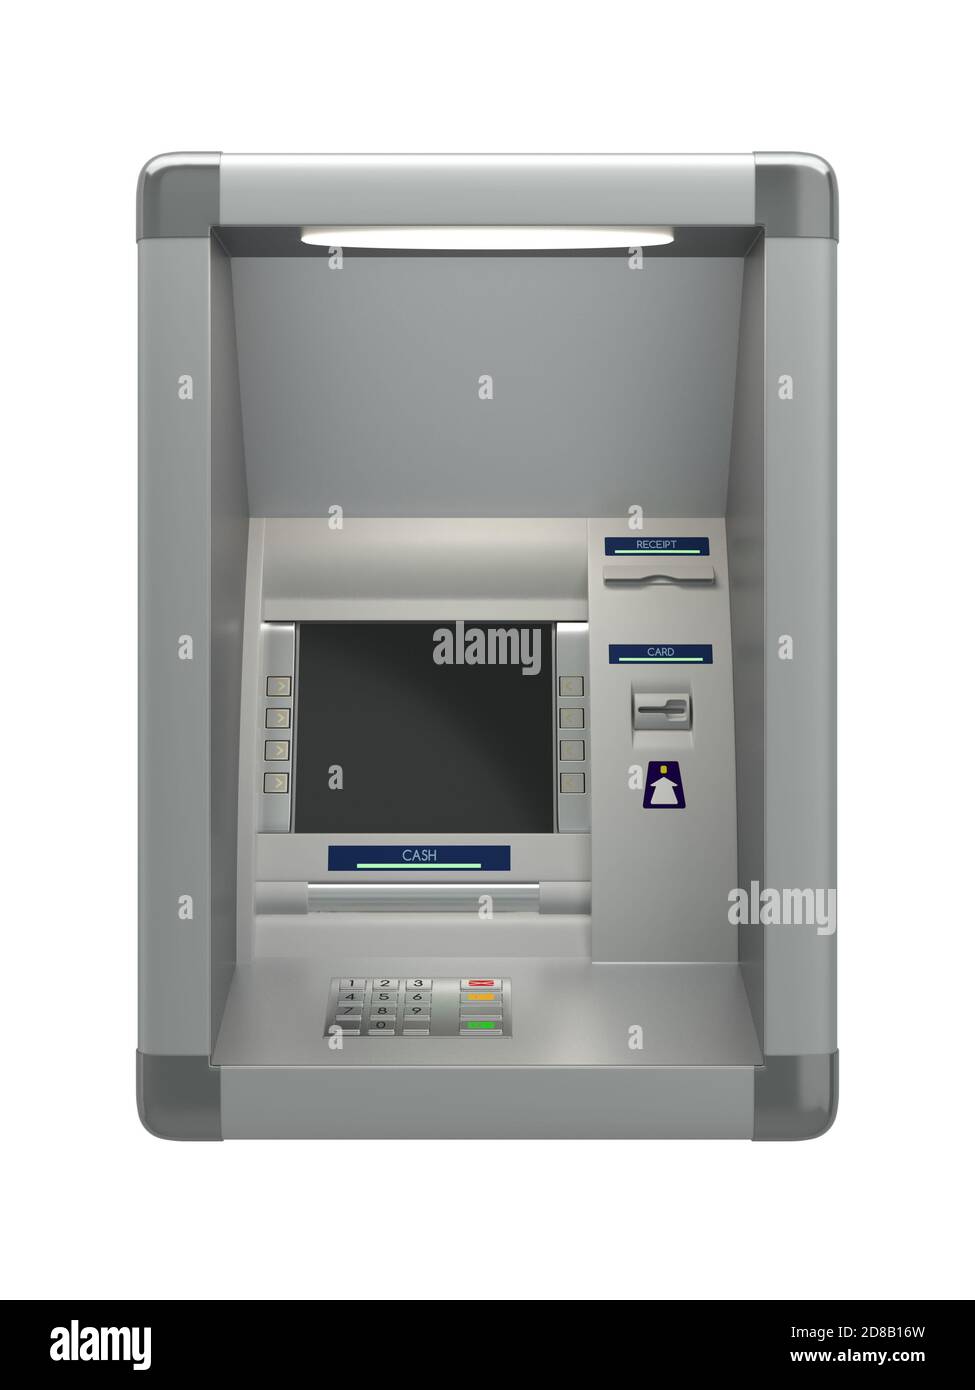 Atm machine on wall Stock Photo